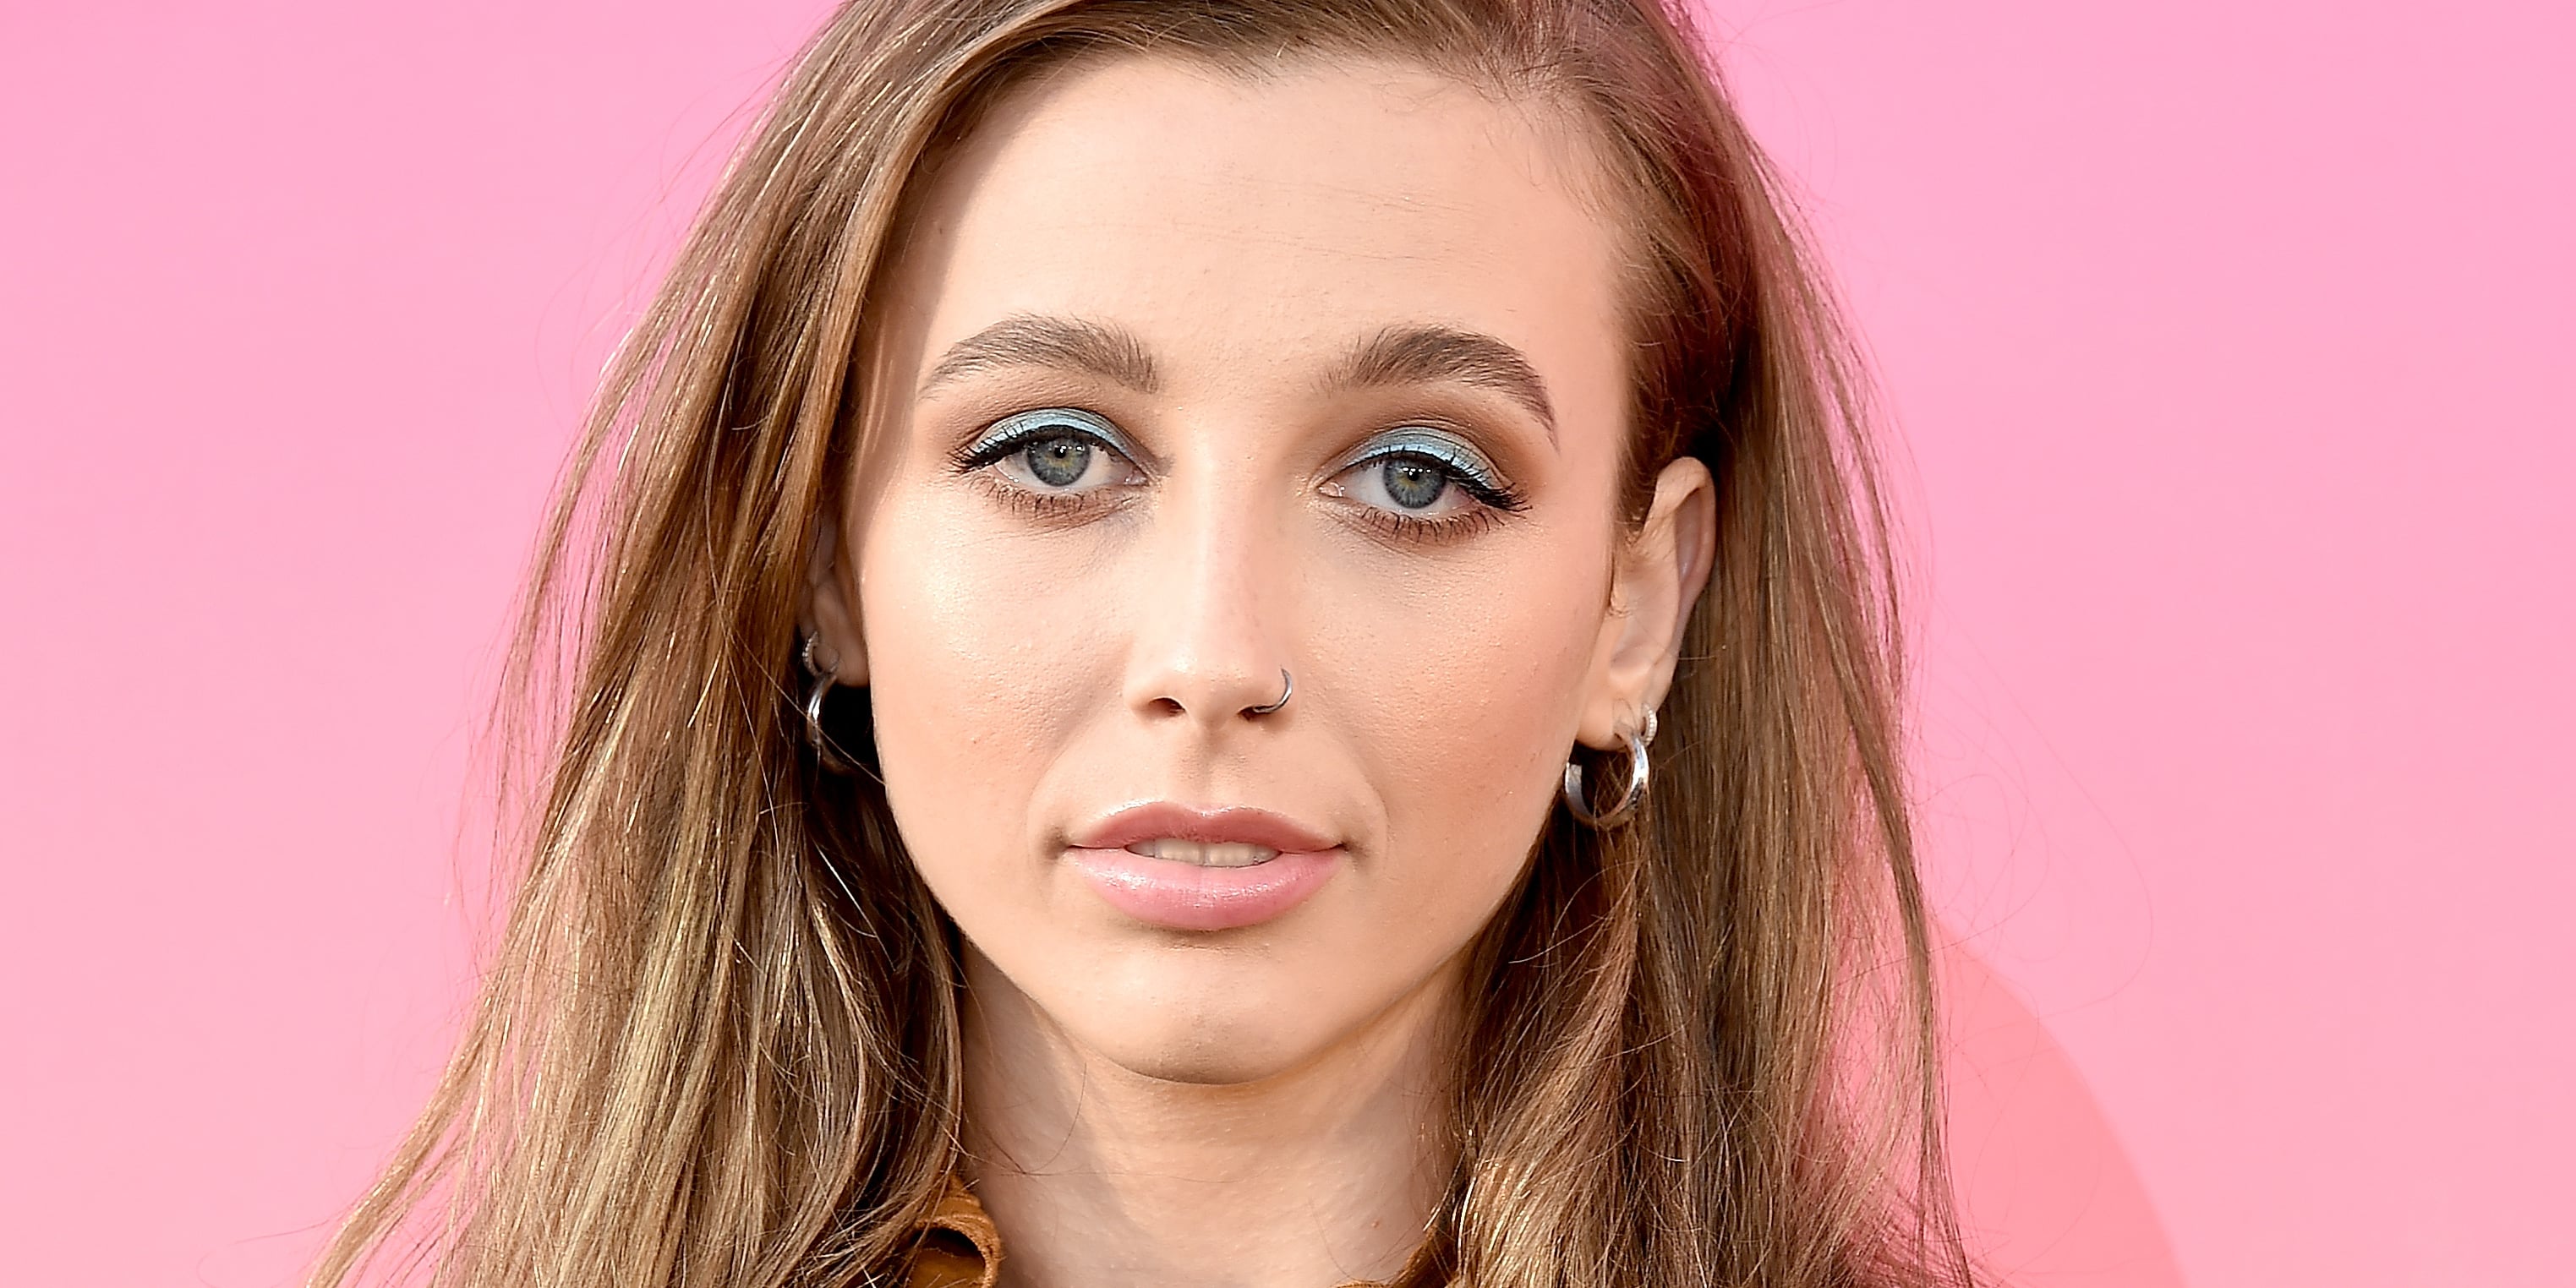 Emma Chamberlain Dyed Her Hair a Red Color